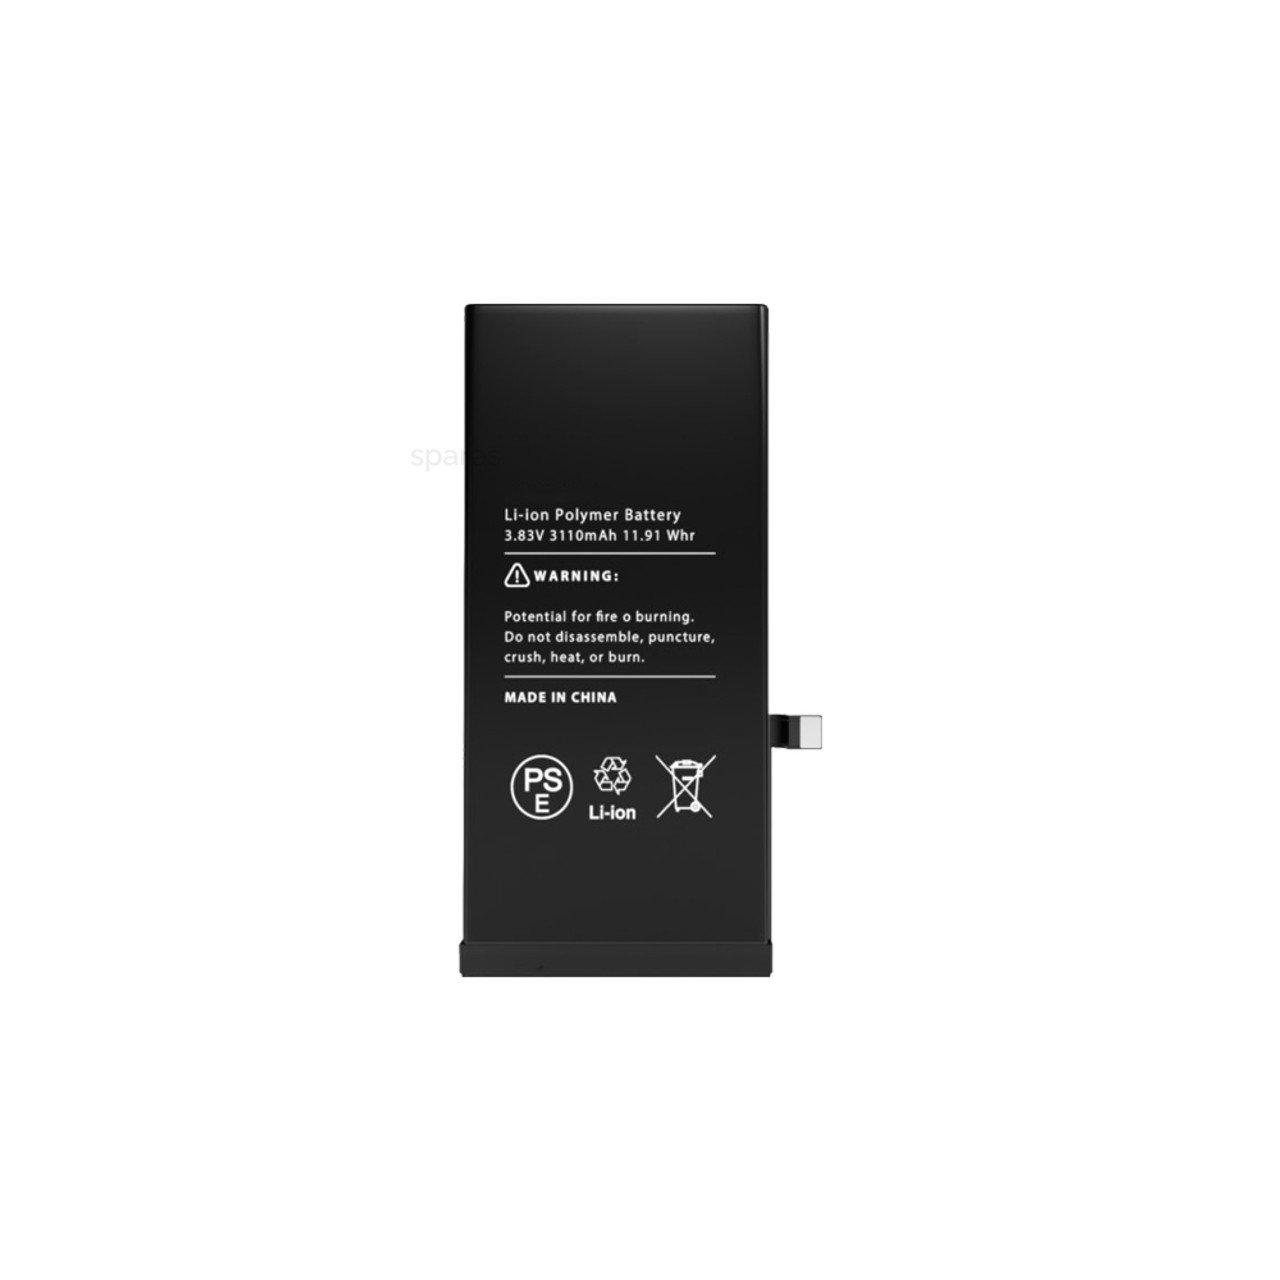 iPhone 11 Battery 3.83V3110mAh Replacement